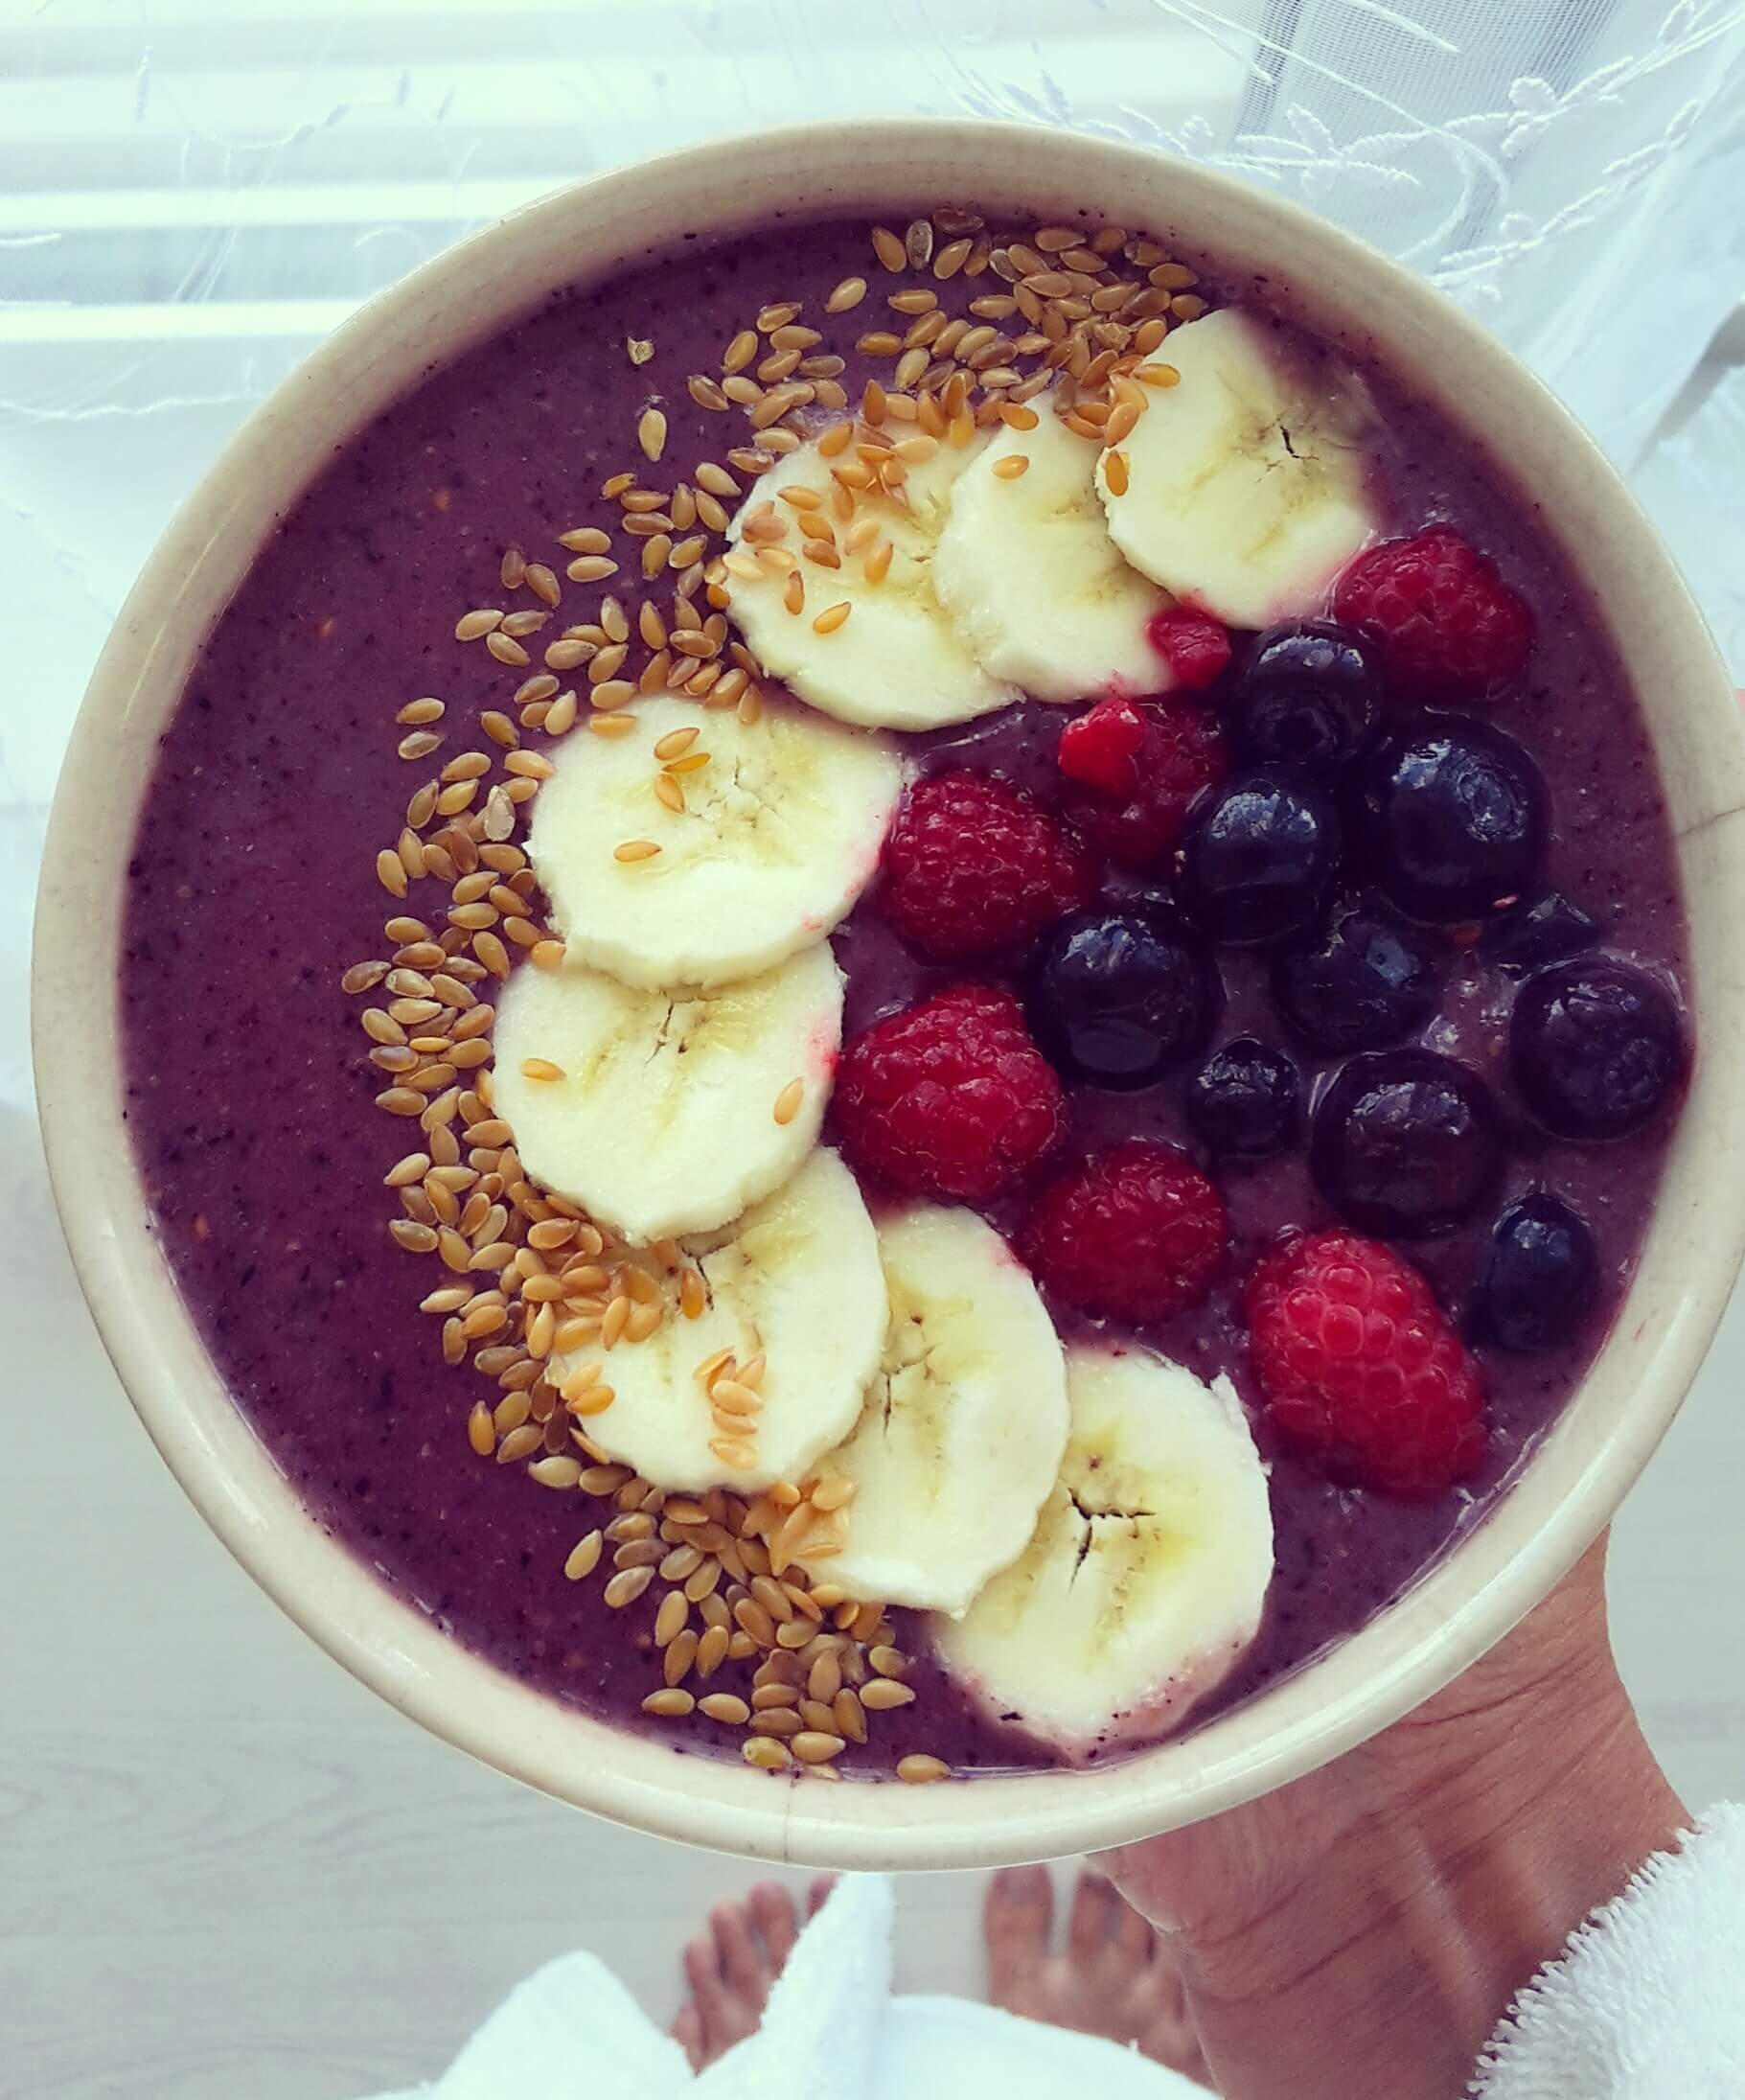 blueberry smoothie with banana and berries